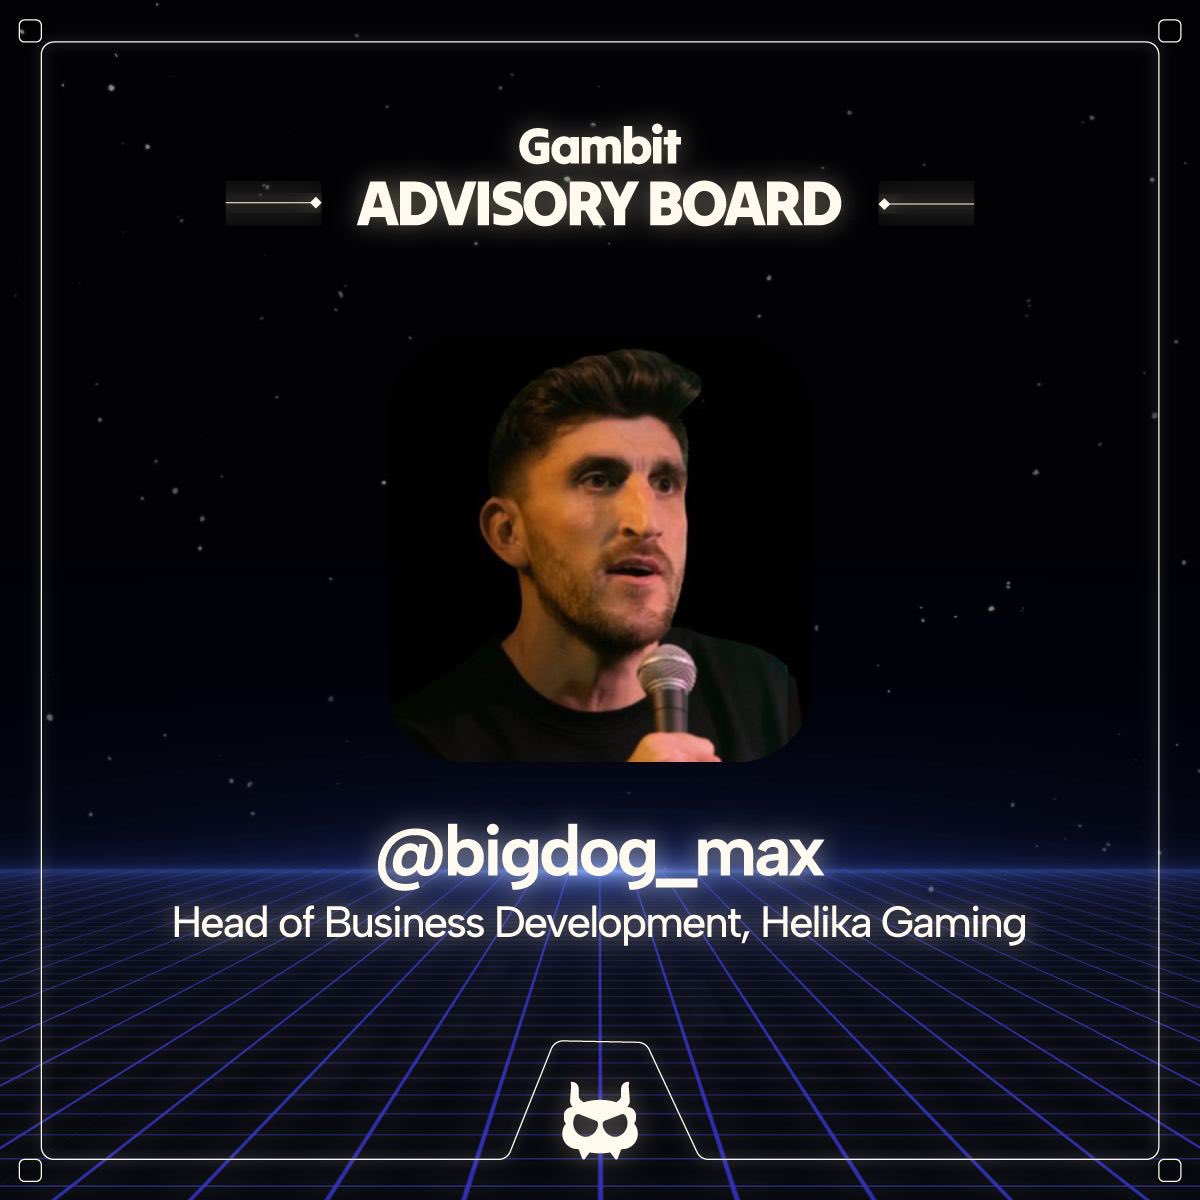 Welcome abroad @bigdog_max 💀 A big dog indeed hailing from Pantera Capital backed Helika Gaming - the industry leading data analytics and game management platform. We’re honoured to officially announce that the Head of Biz Dev @helikagaming has joined our Gambit Advisory…